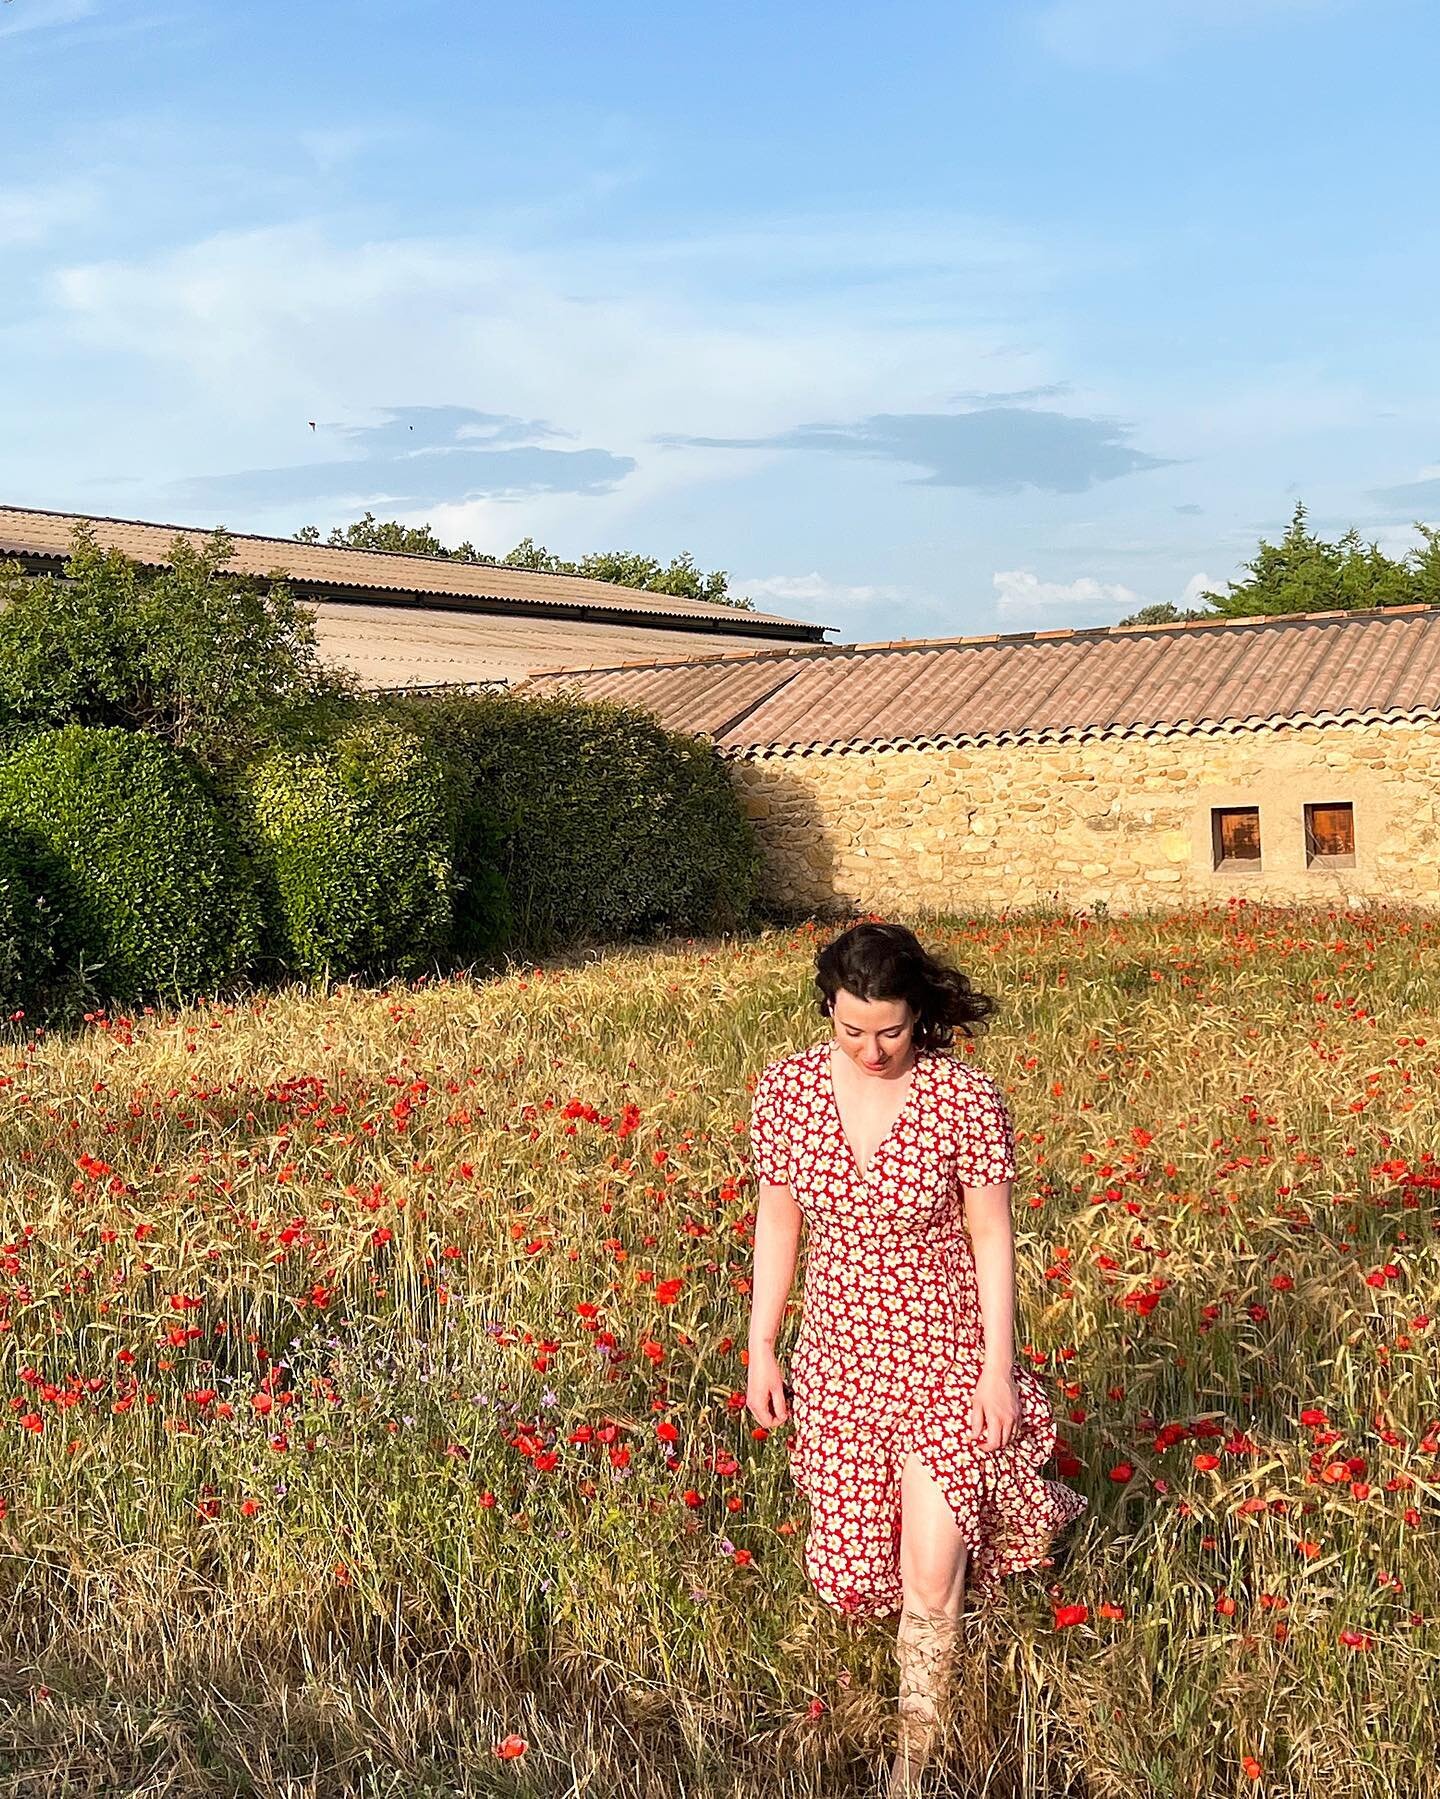 The red poppies of Provence 🇫🇷